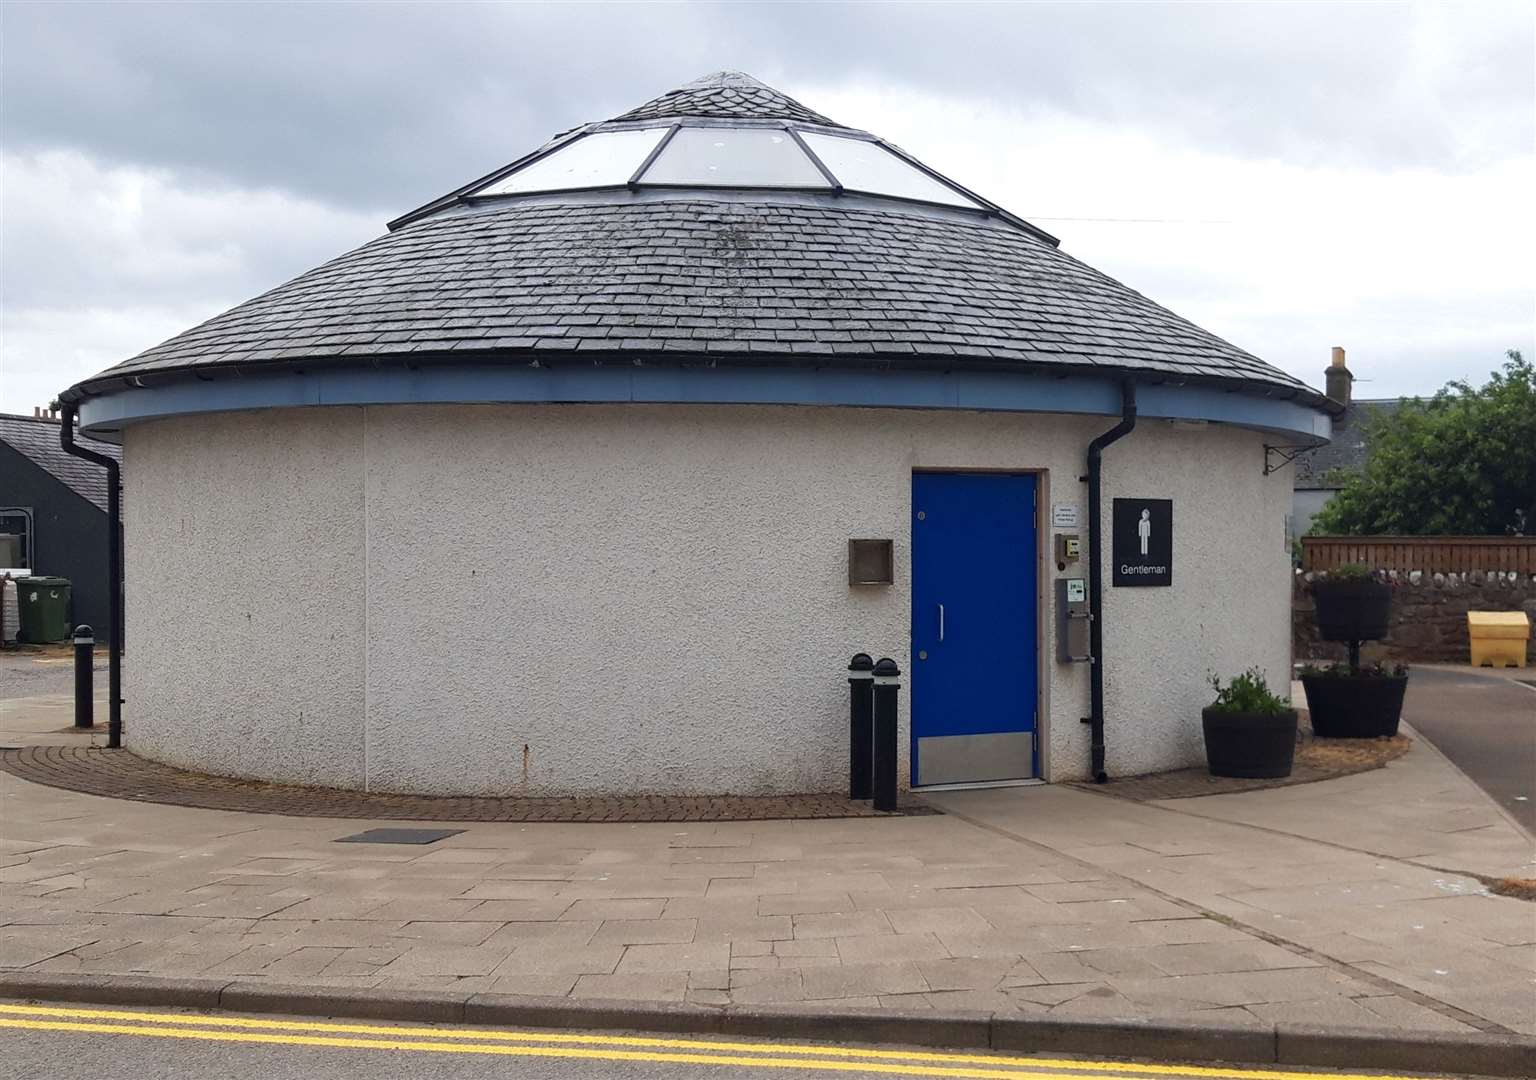 Golspie public toilets are housed in a unique circular building.